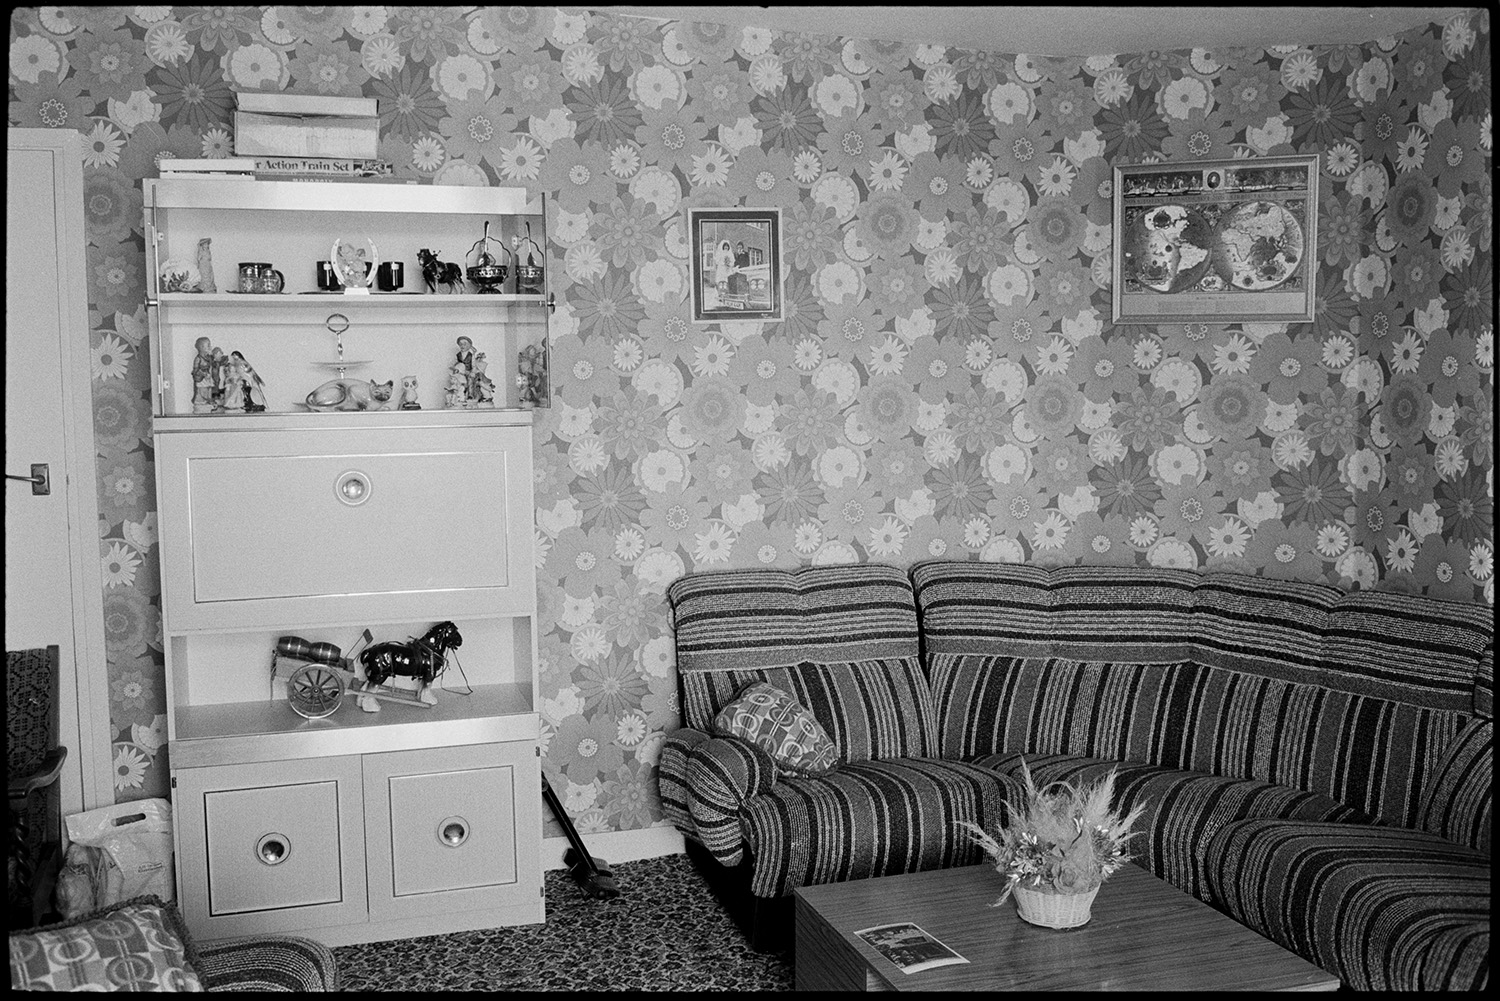 House interior, sitting room, pram and dresser, comparison with old photo, fitted kitchen. 
[Interior of a house in Lovacott Barton, Newton Tracey, showing a display of china ornaments on a dresser. Two pictures are hung on the wall which is decorated with floral wallpaper. A corner sofa and coffee table with a floral basket display are also visible.]